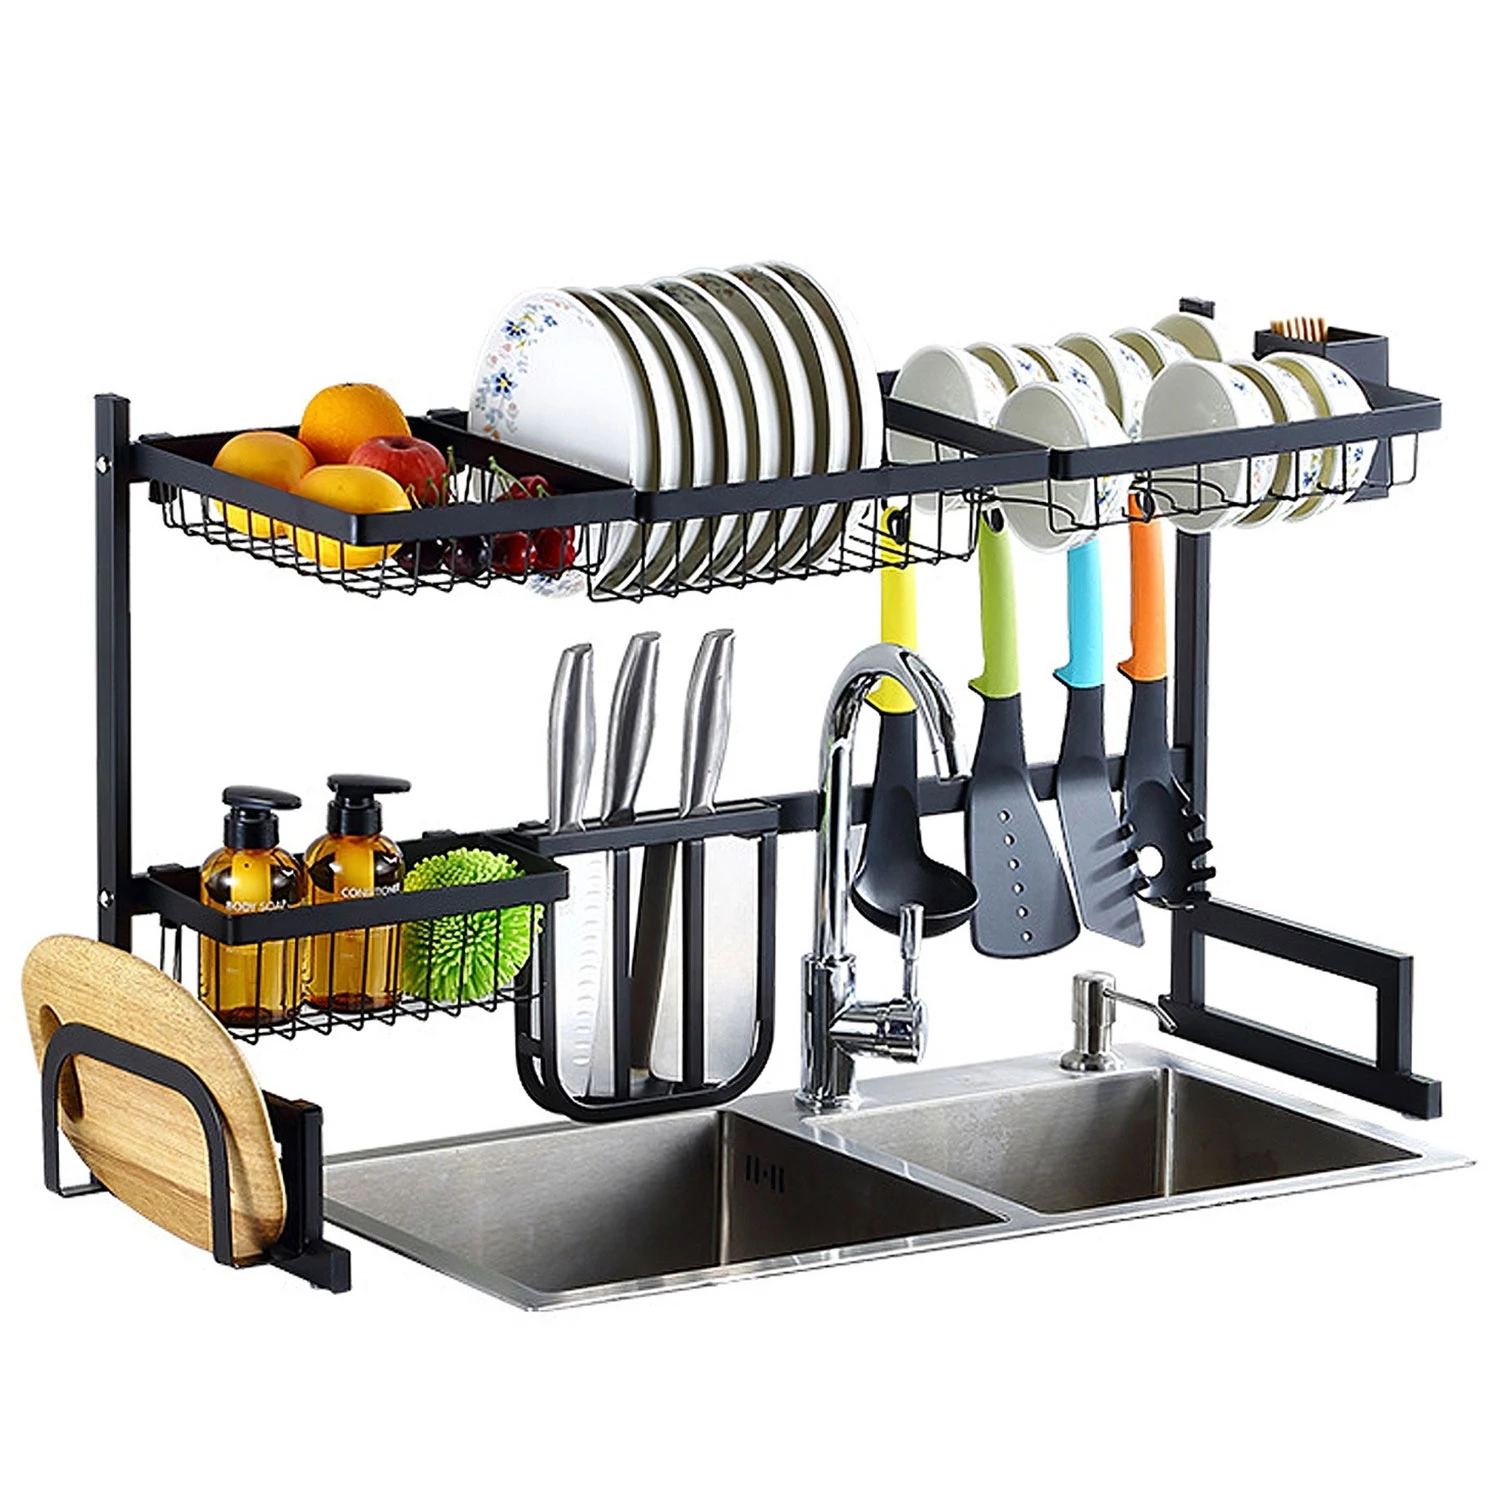 2-Tier Sink Dish Drying Rack, Stainless Steel 33.7" Large Drainer And Utensil Organizer